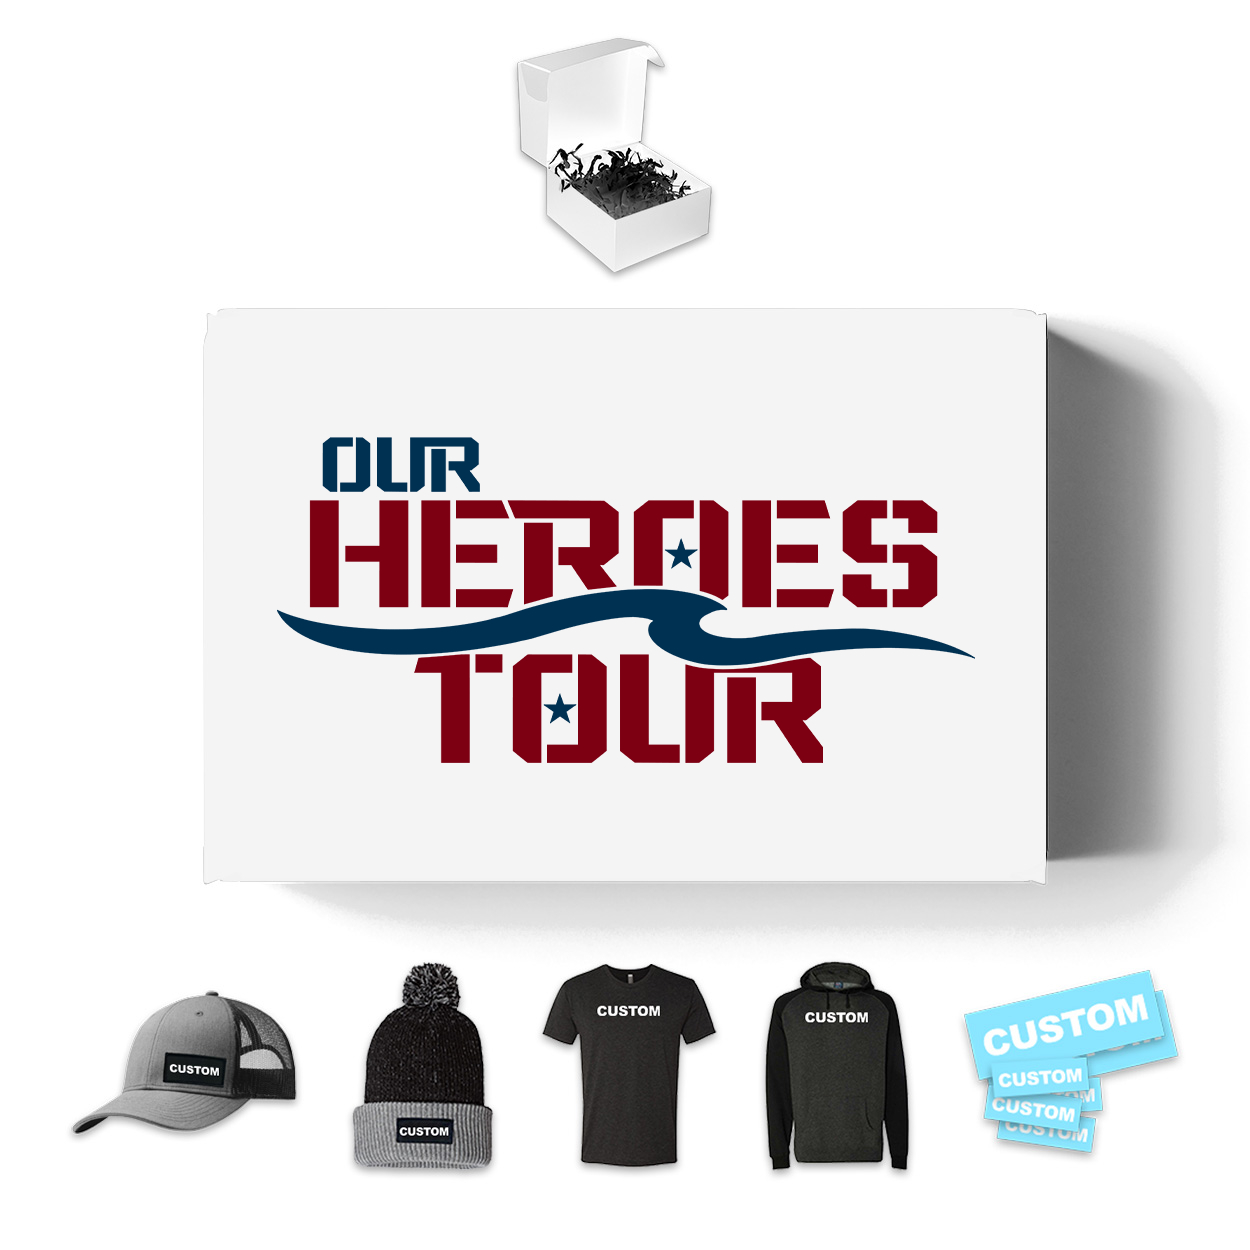 Our Heroes Tour Premium Care Package White